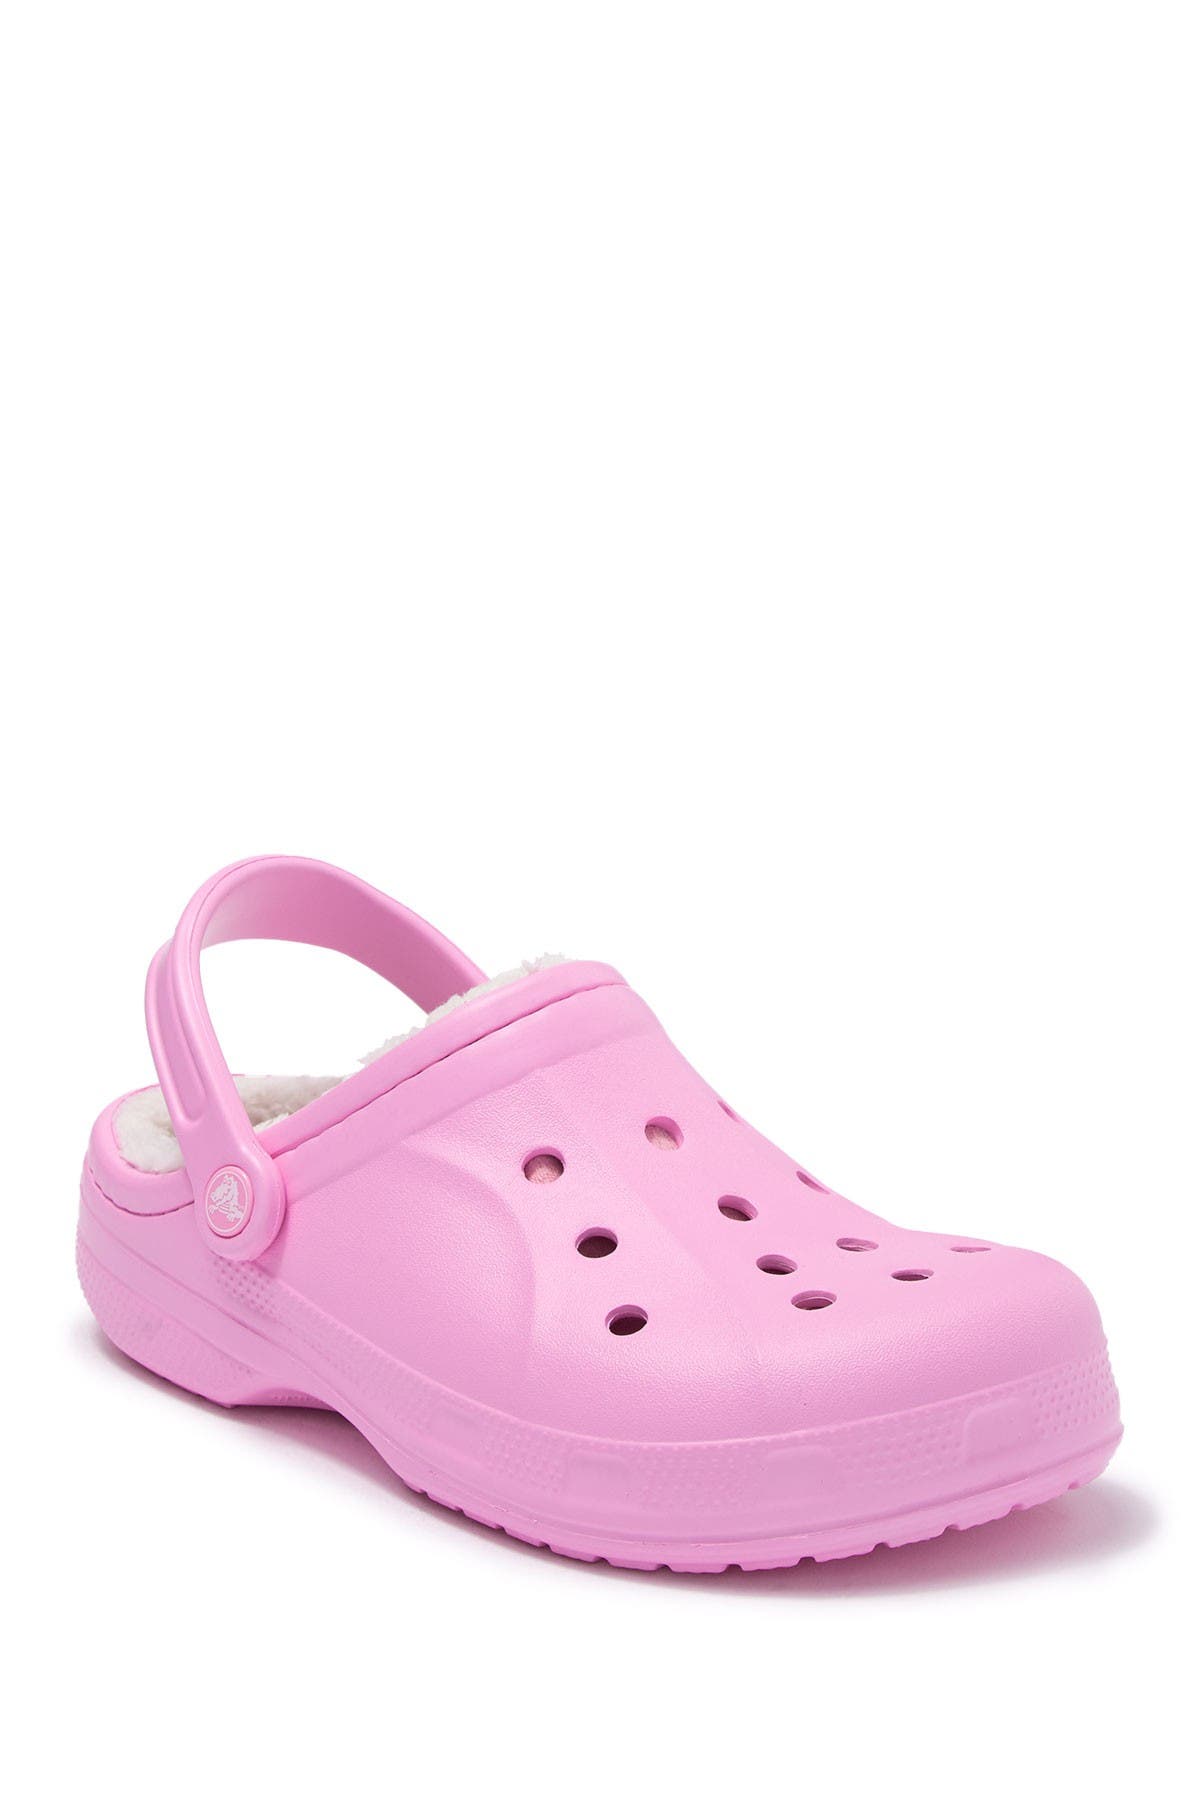 crocs with fur in it